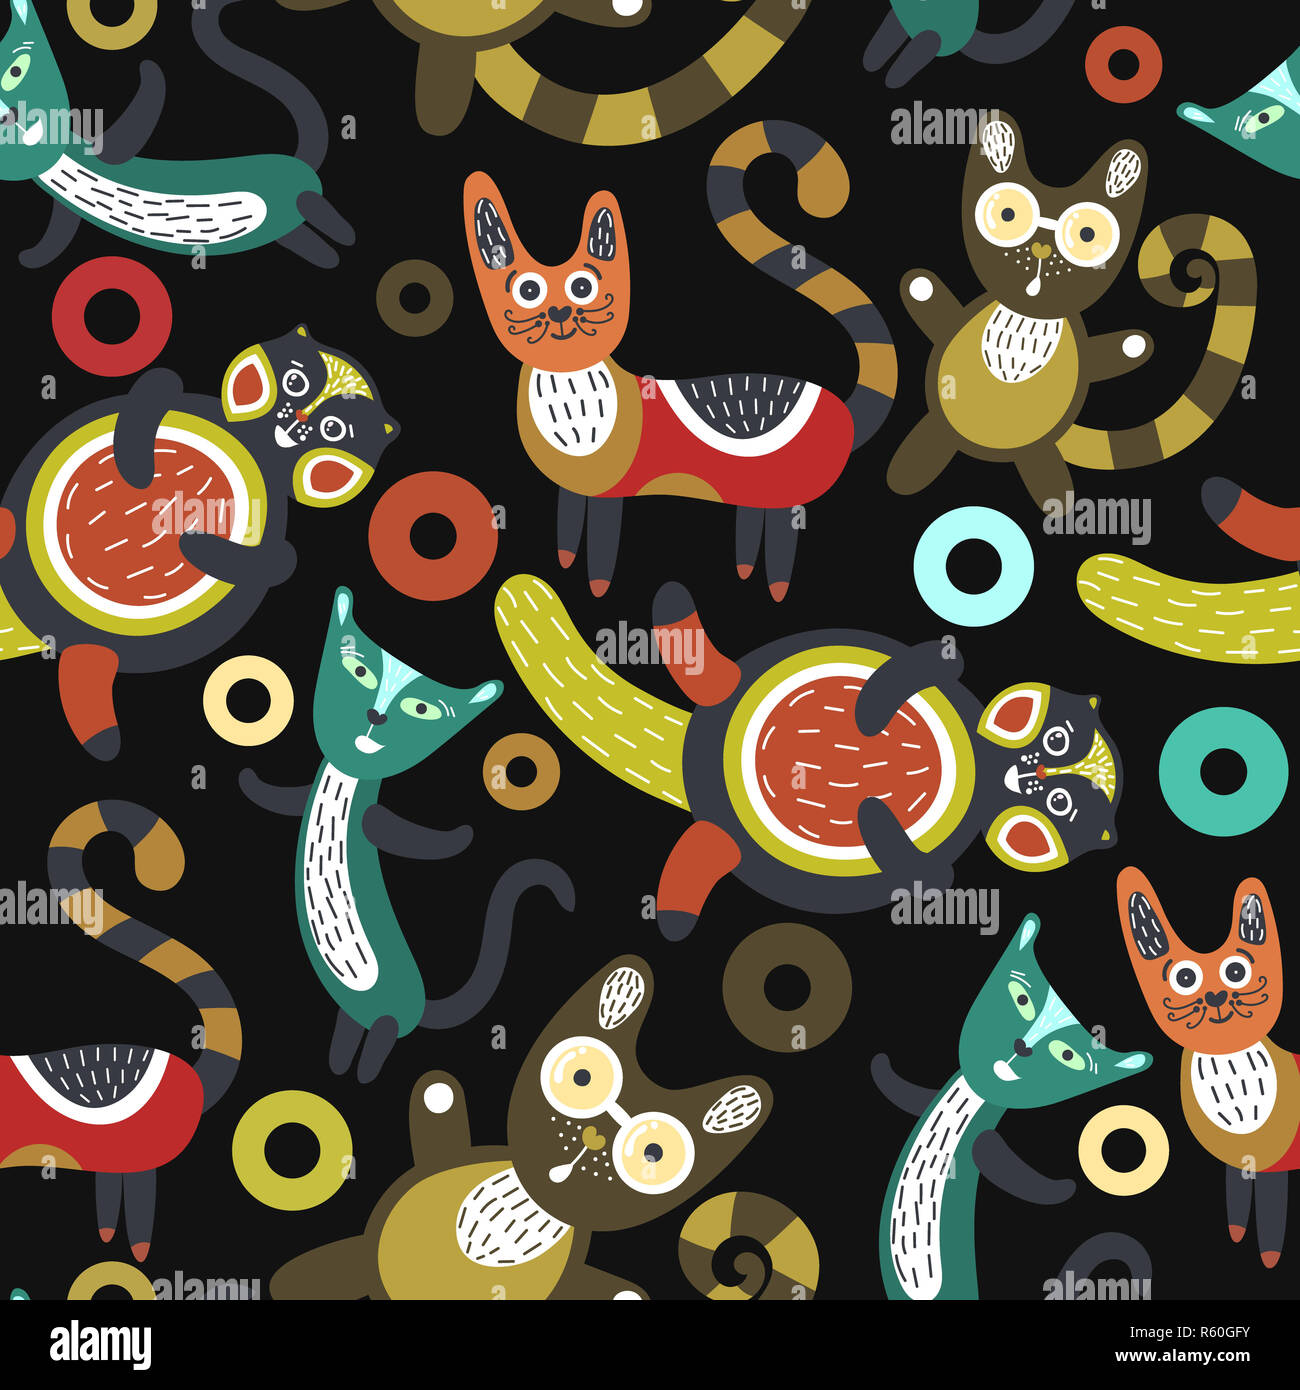 Seamless pattern with funny cats. Artistic background with cute kittens. Colorful animals. Favorite pets Stock Photo